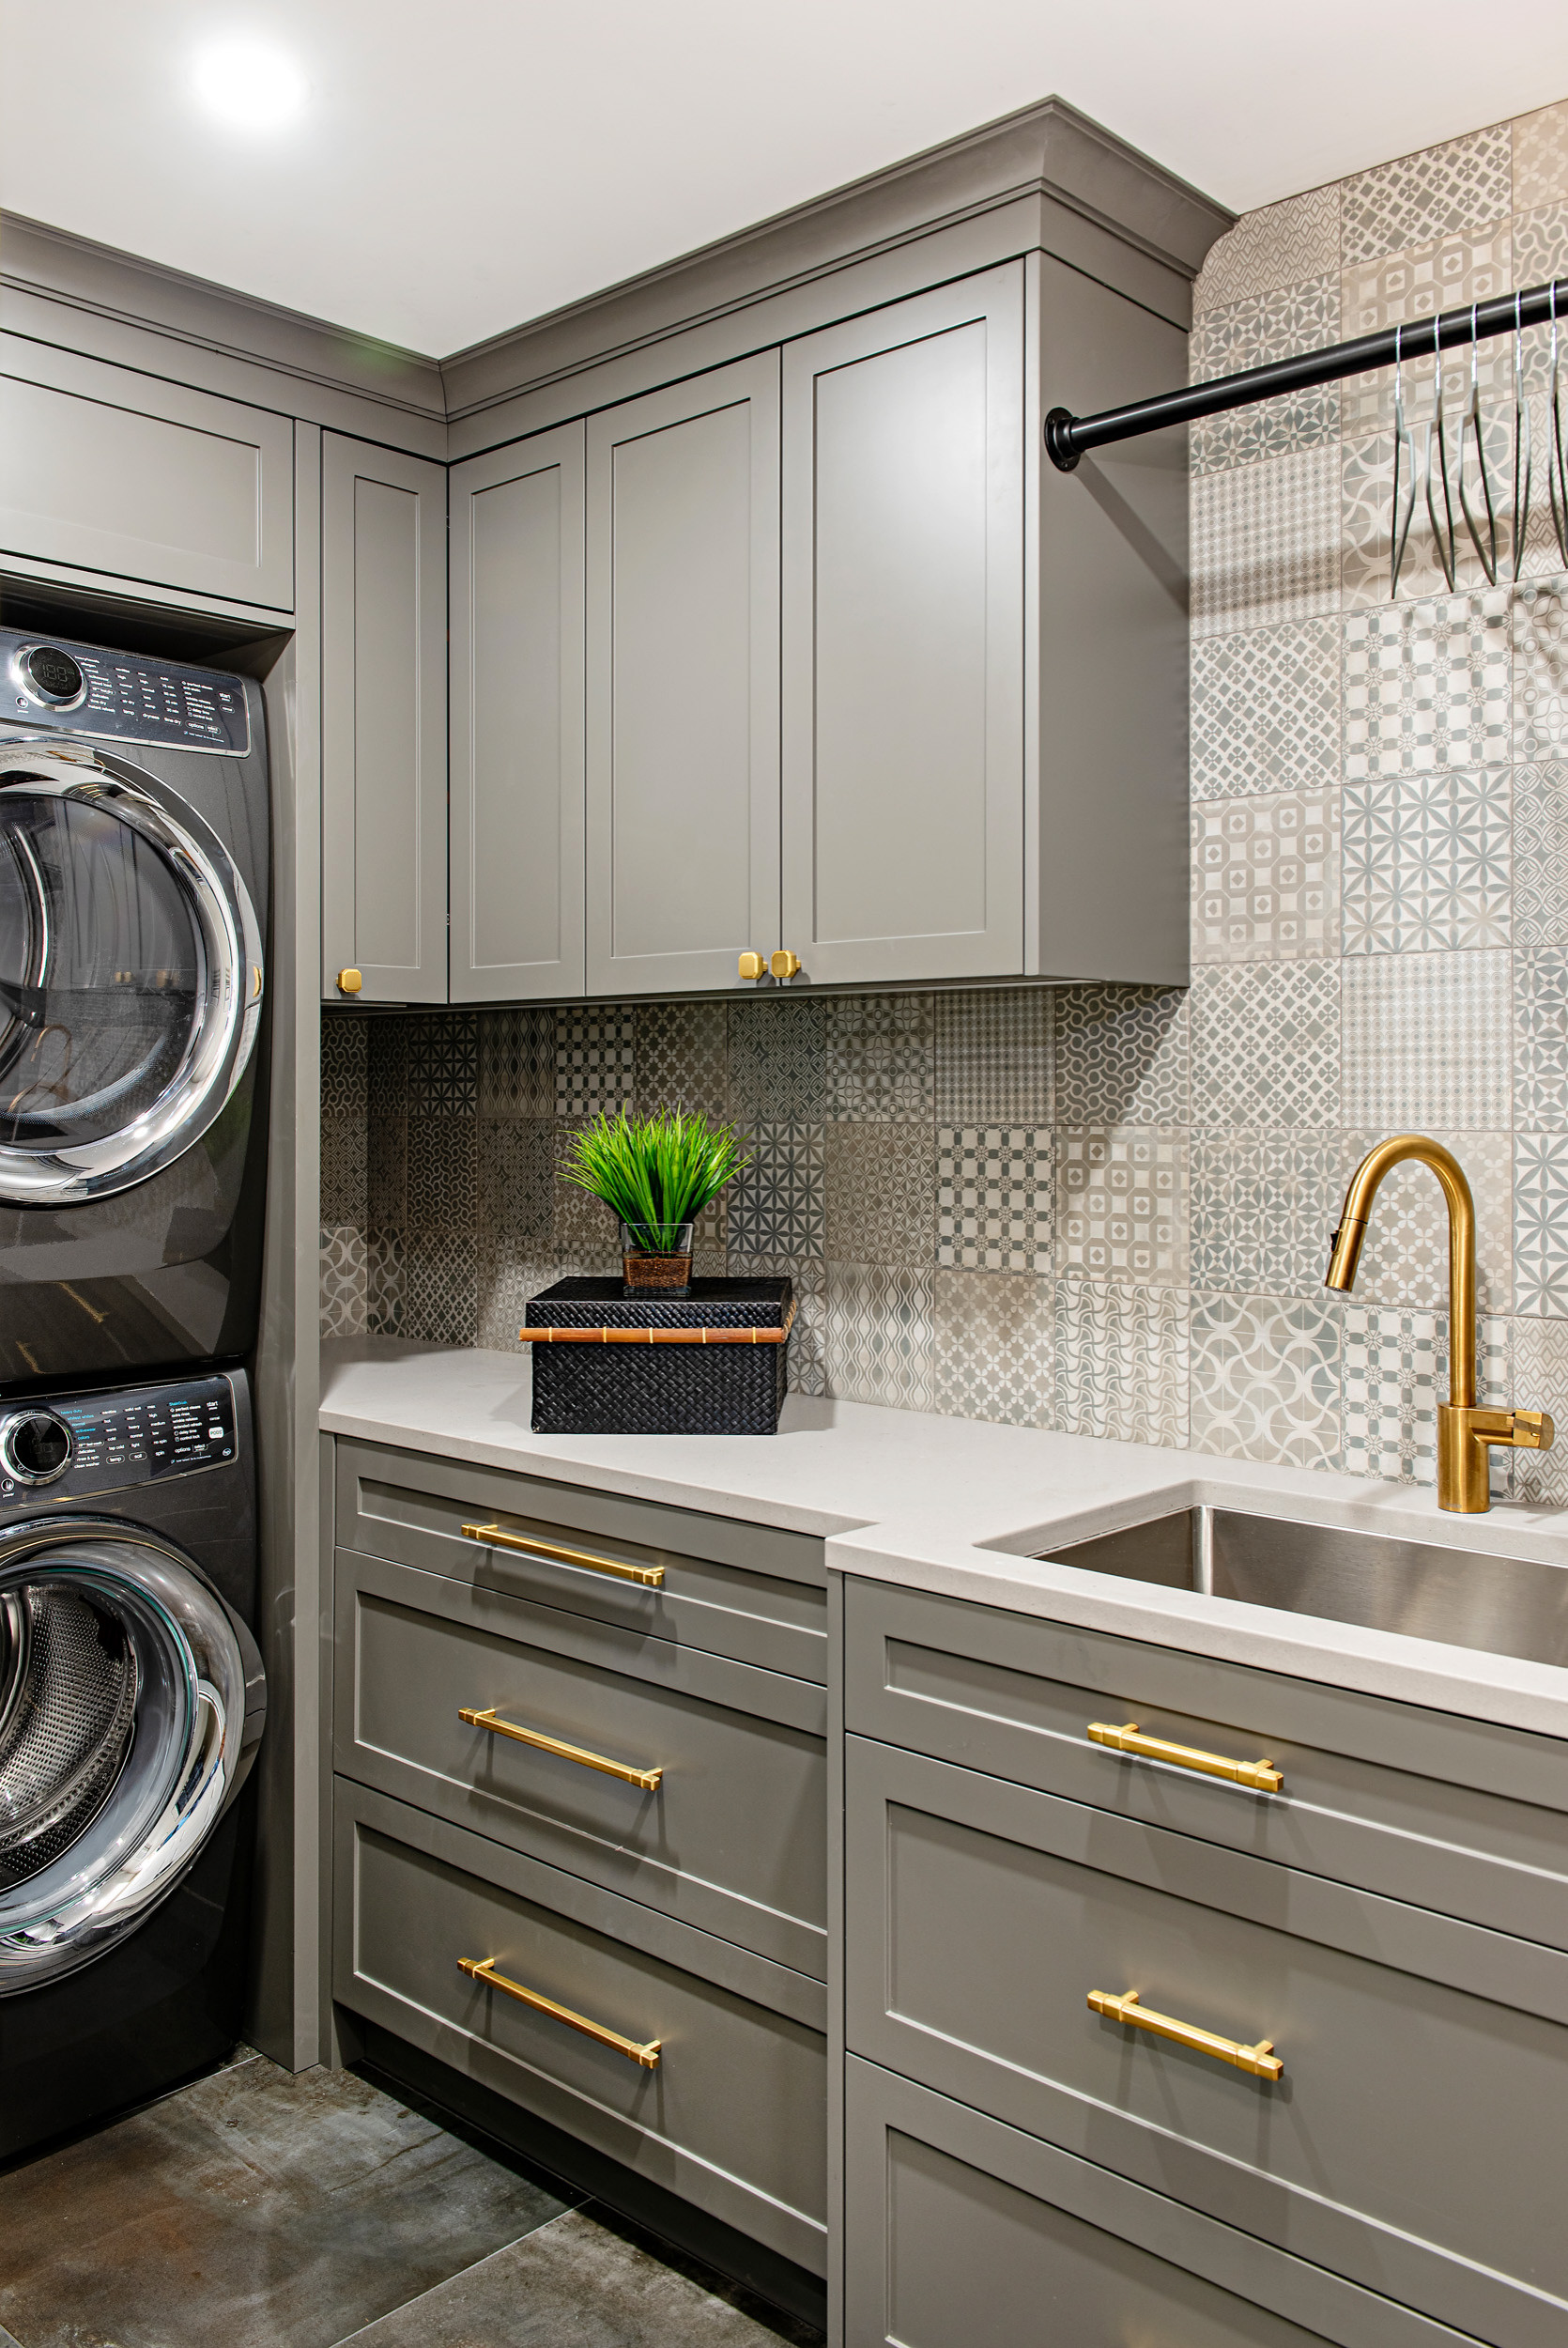 Farmhouse Sink with Gray Laundry Room Cabinets - Transitional - Laundry Room